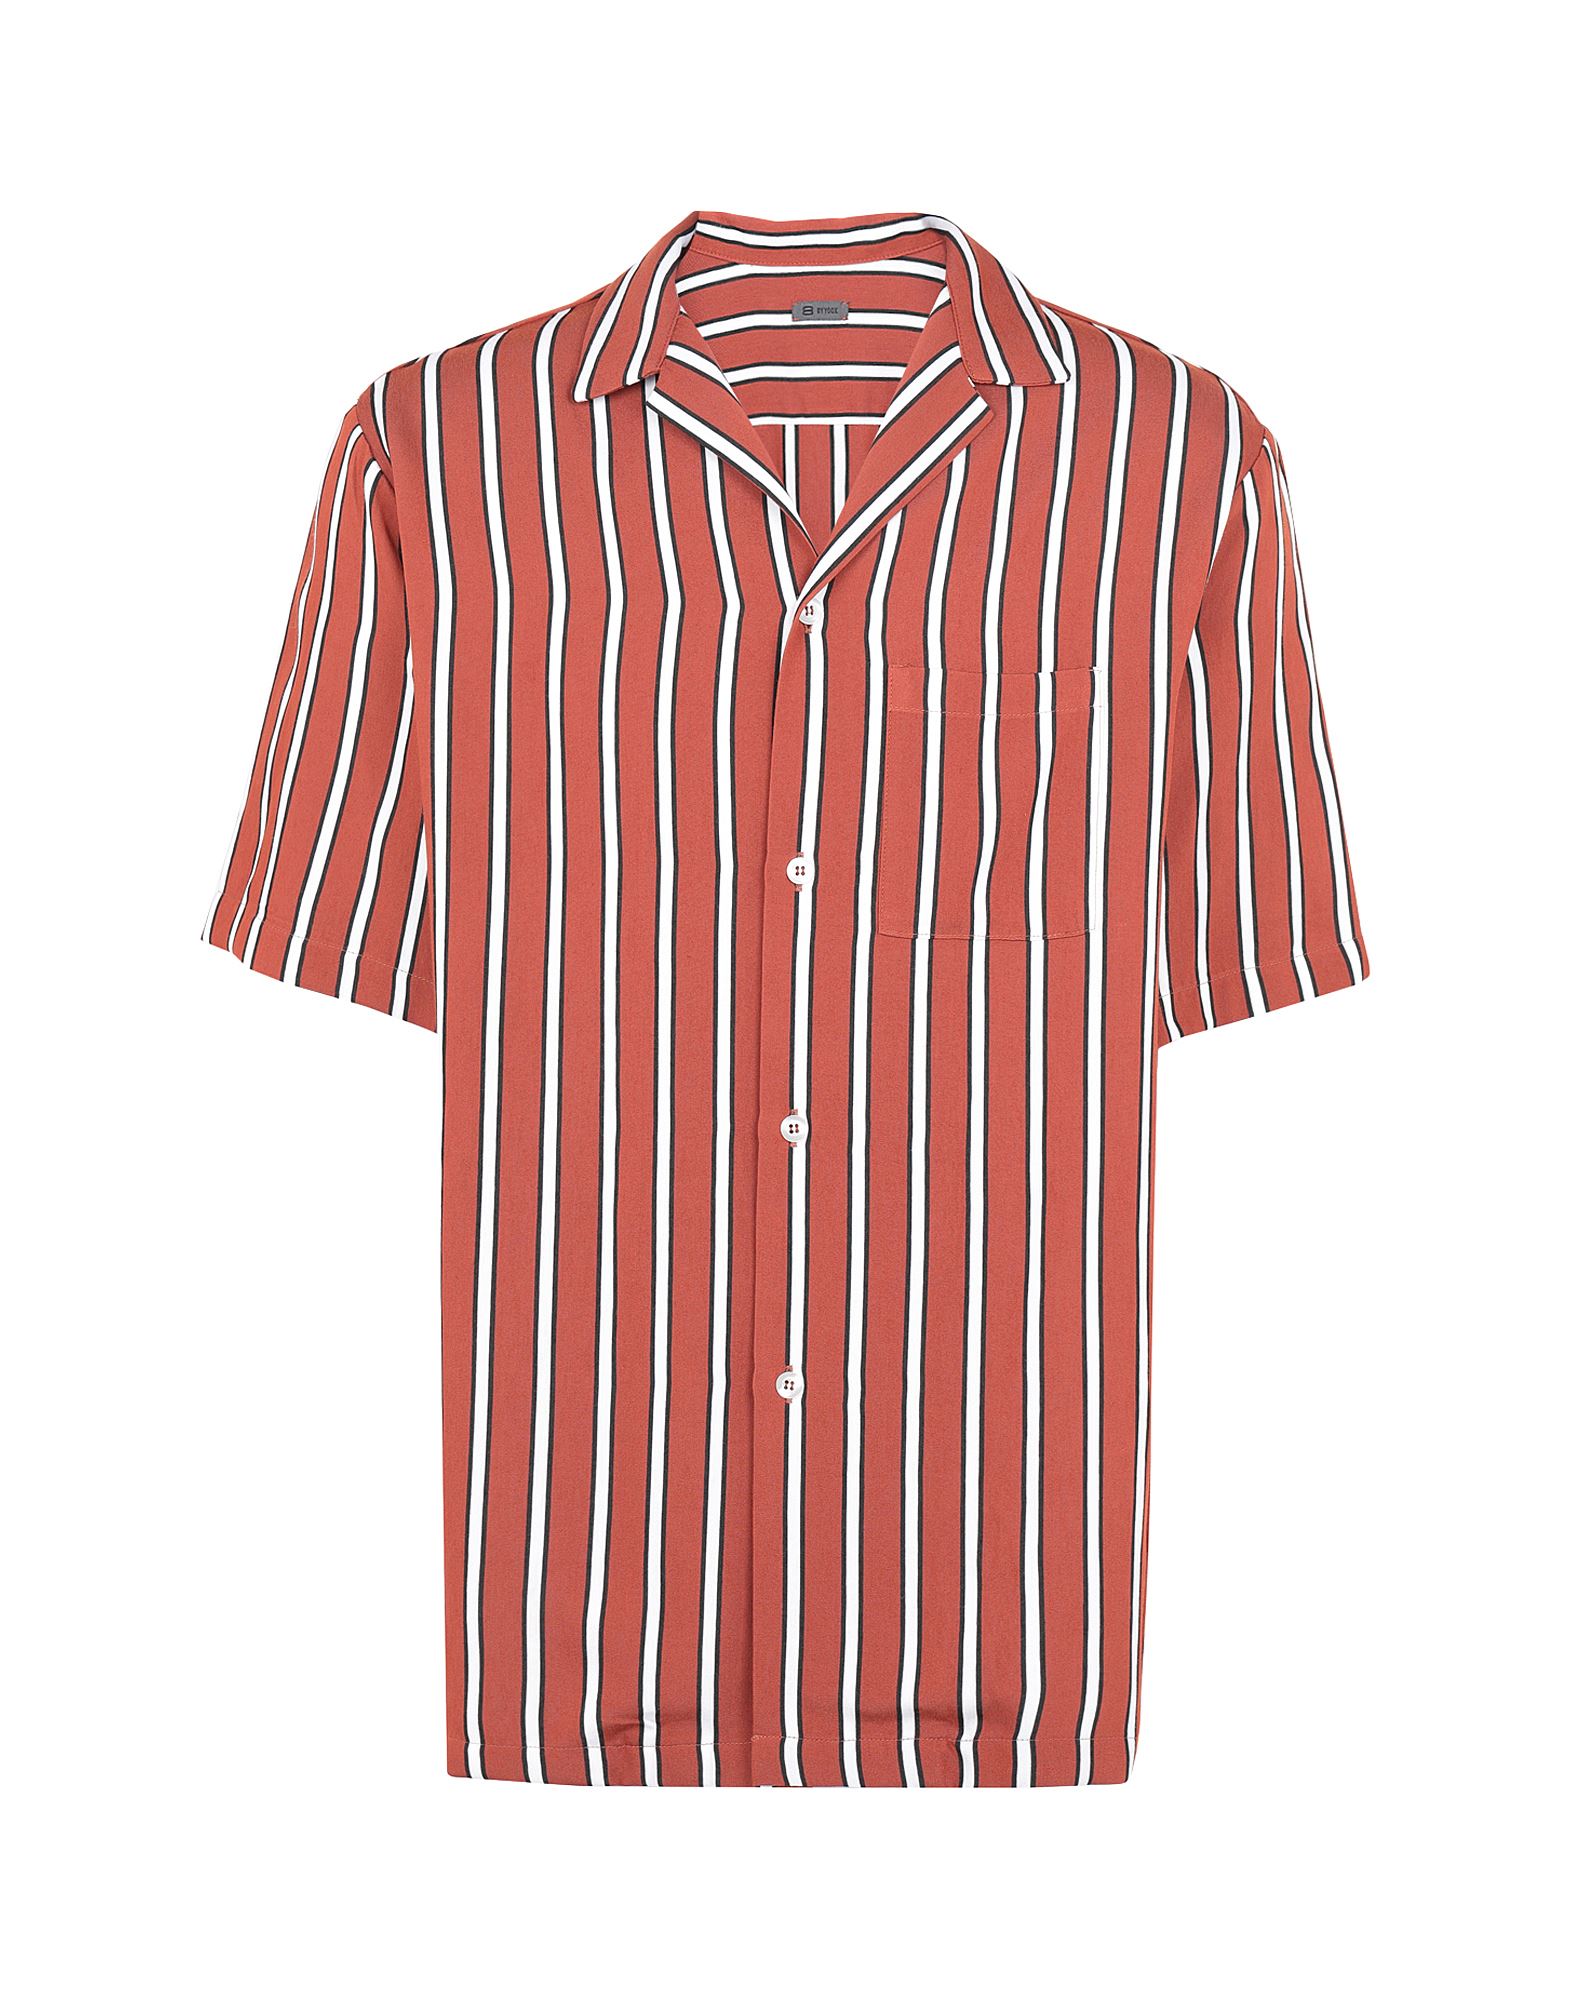 ＜YOOX＞ ★60%OFF！8 by YOOX メンズ シャツ ブラウン S レーヨン 90% / ナイロン 10% STRIPED OVERSIZE S/SLEEVE SHIRT